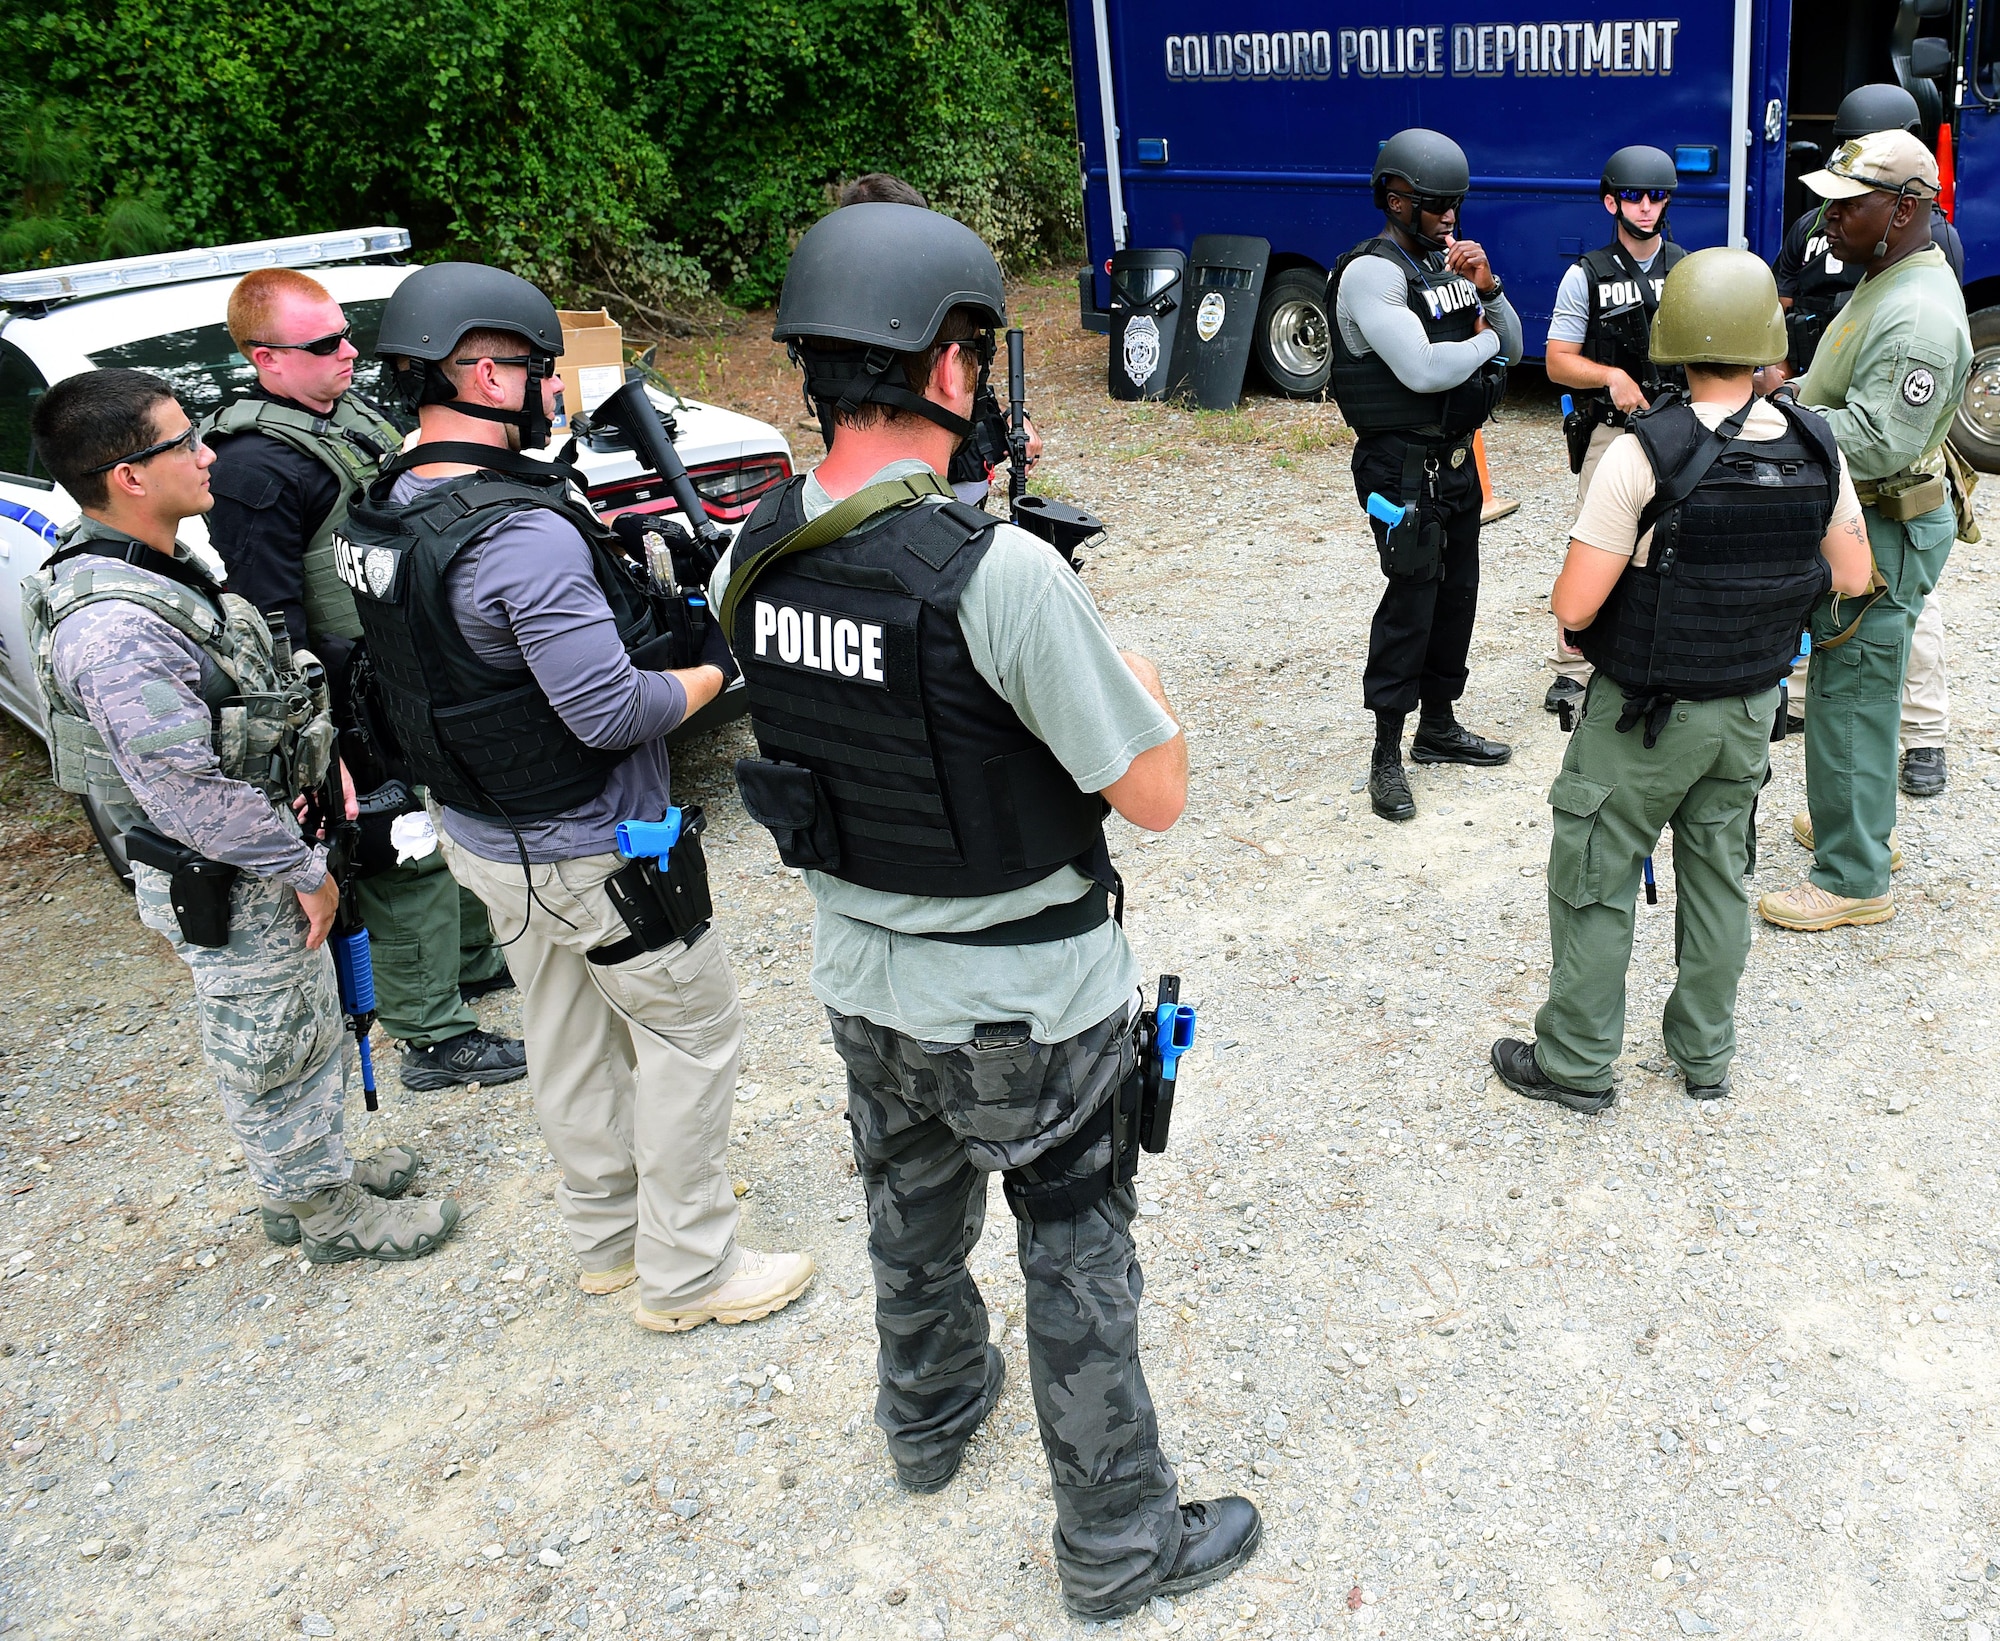 A.A. Boone, founder and president of Specialized Realistic Training Inc. (right), instructs students on the basic SWAT course before entering the shoot-house, Aug. 3, 2017, at Seymour Johnson Air Force Base, North Carolina.